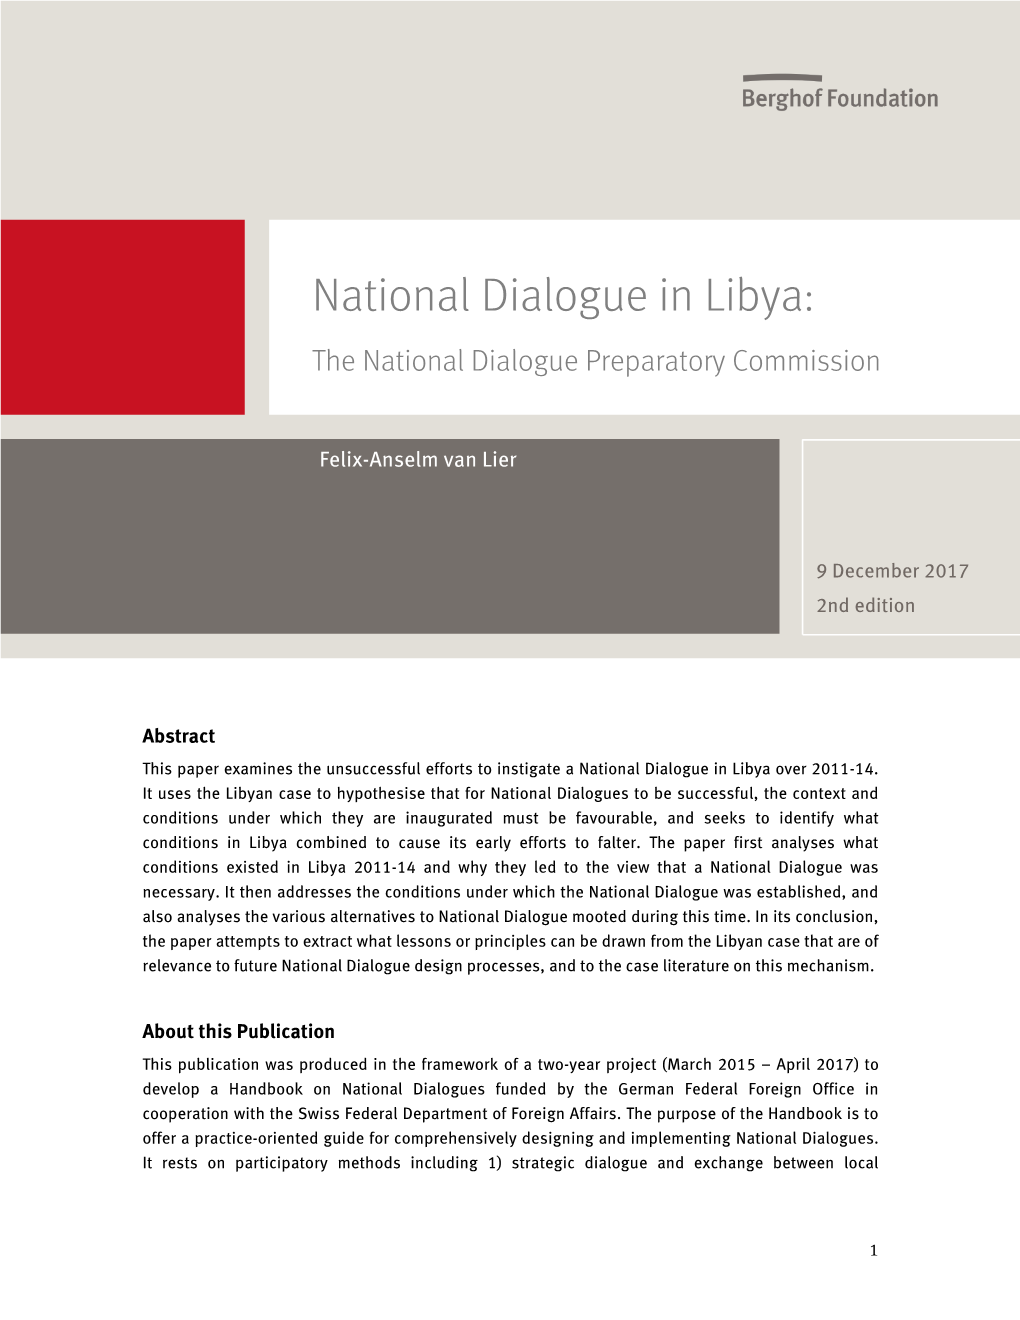 National Dialogue in Libya: the National Dialogue Preparatory Commission